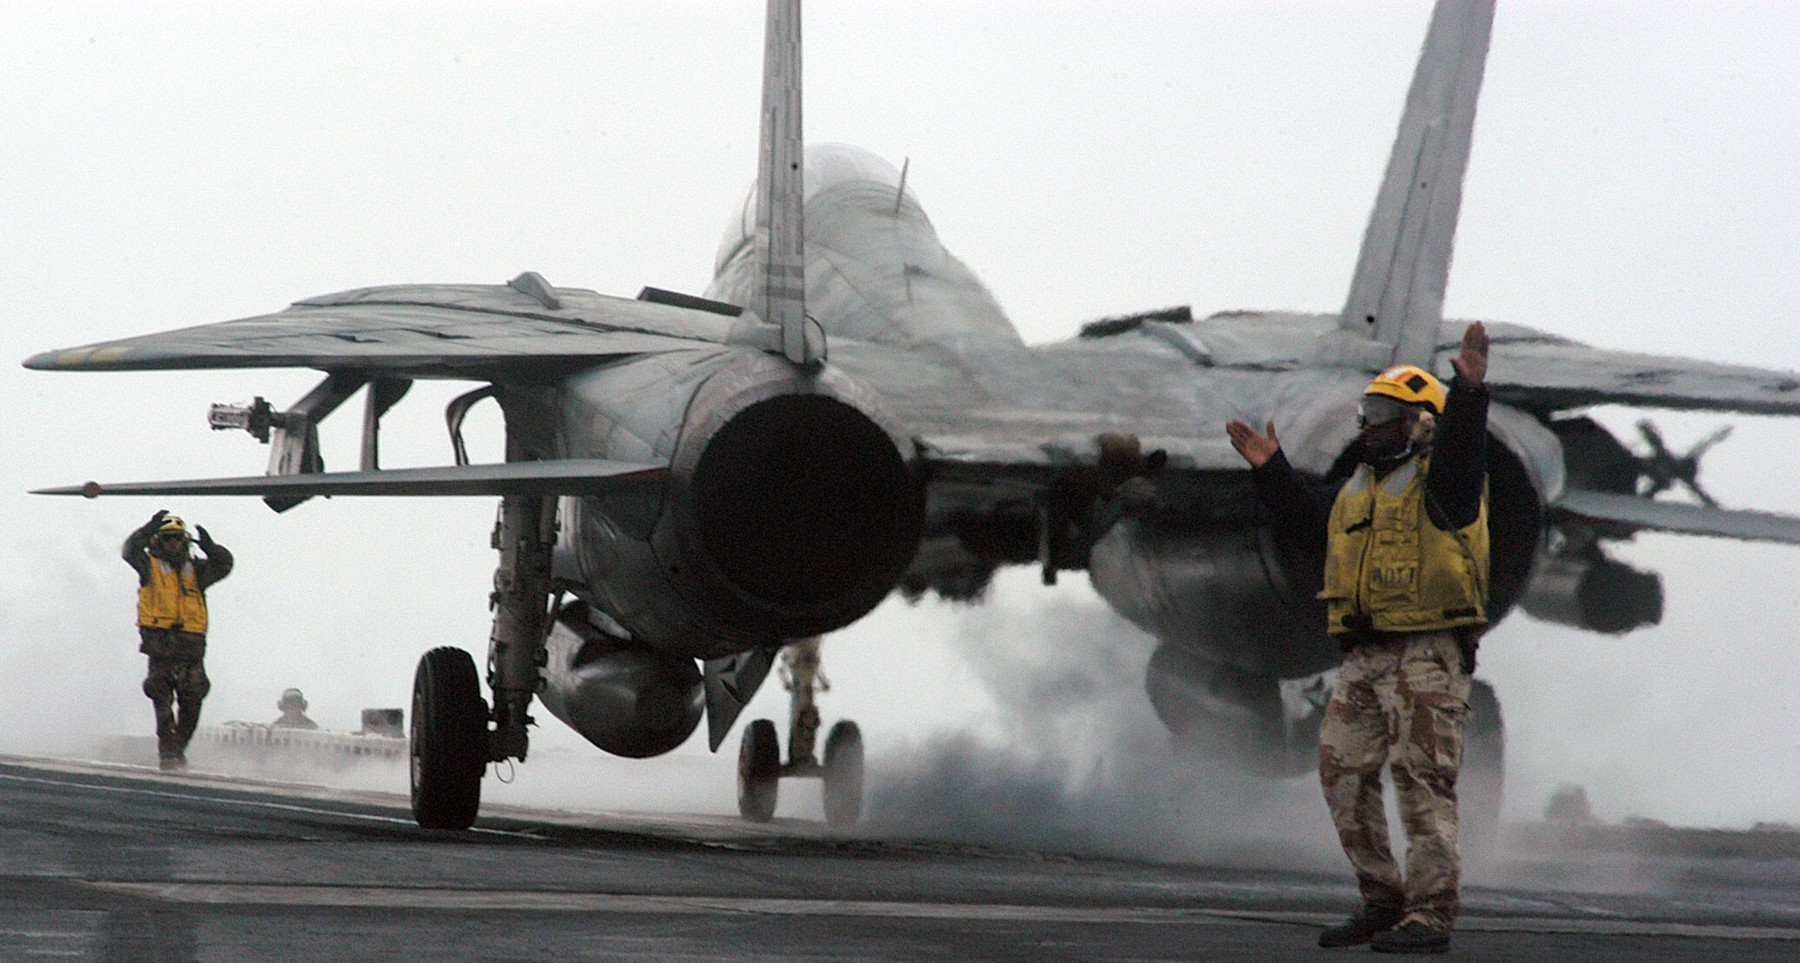 vf-211 fighting checkmates fighter squadron f-14a tomcat us navy carrier air wing cvw-1 uss enterprise cvn-65 15